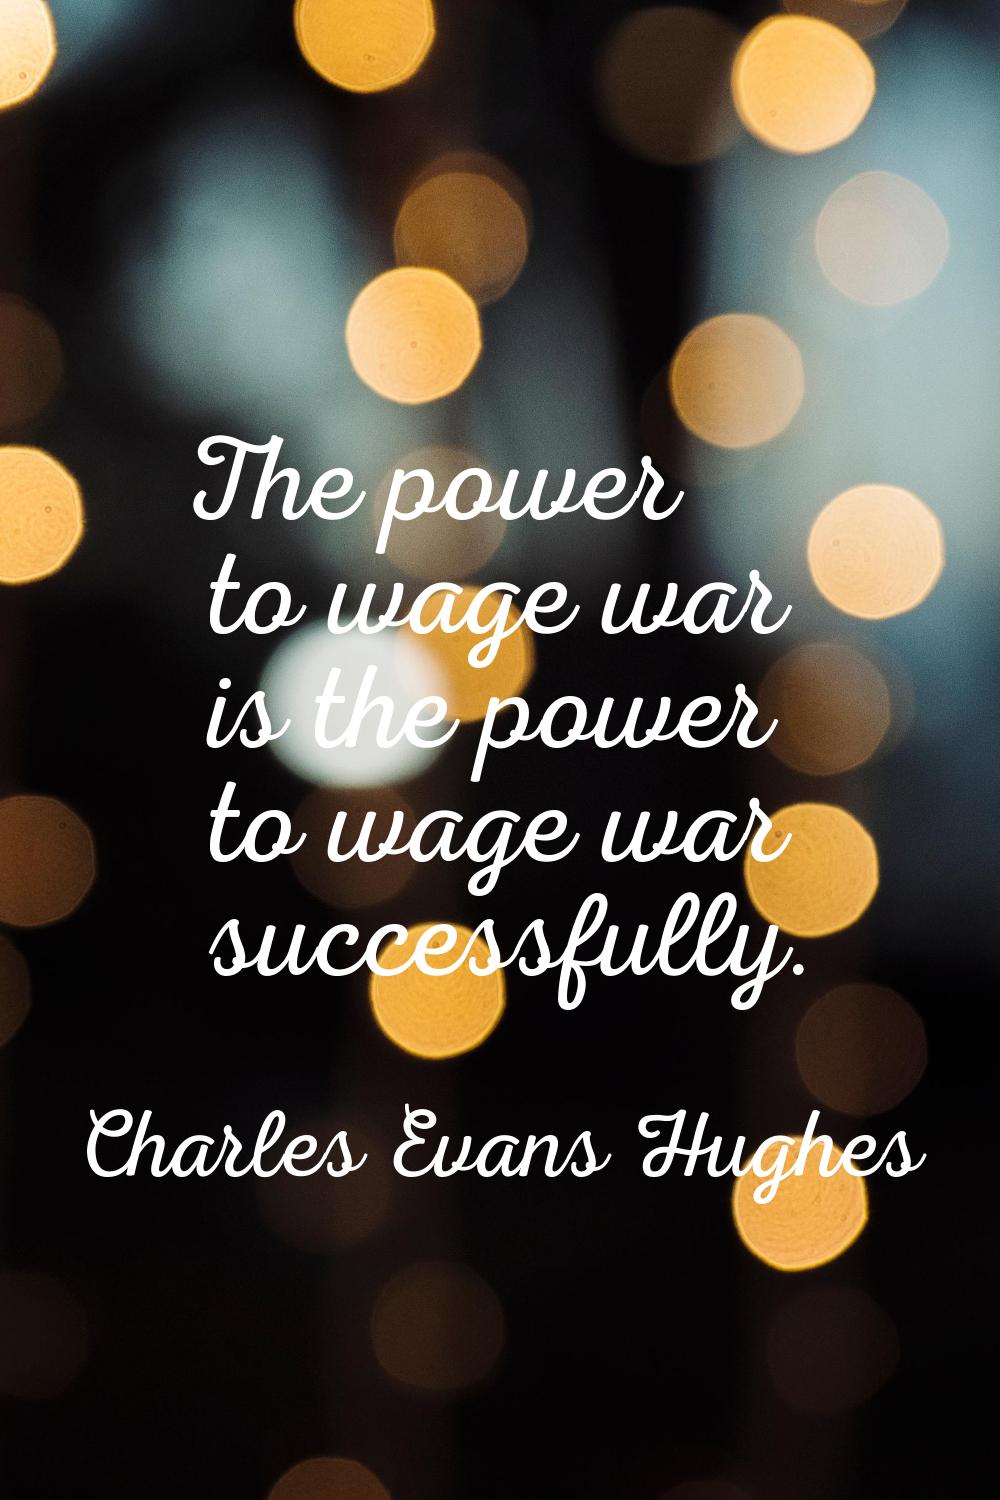 The power to wage war is the power to wage war successfully.